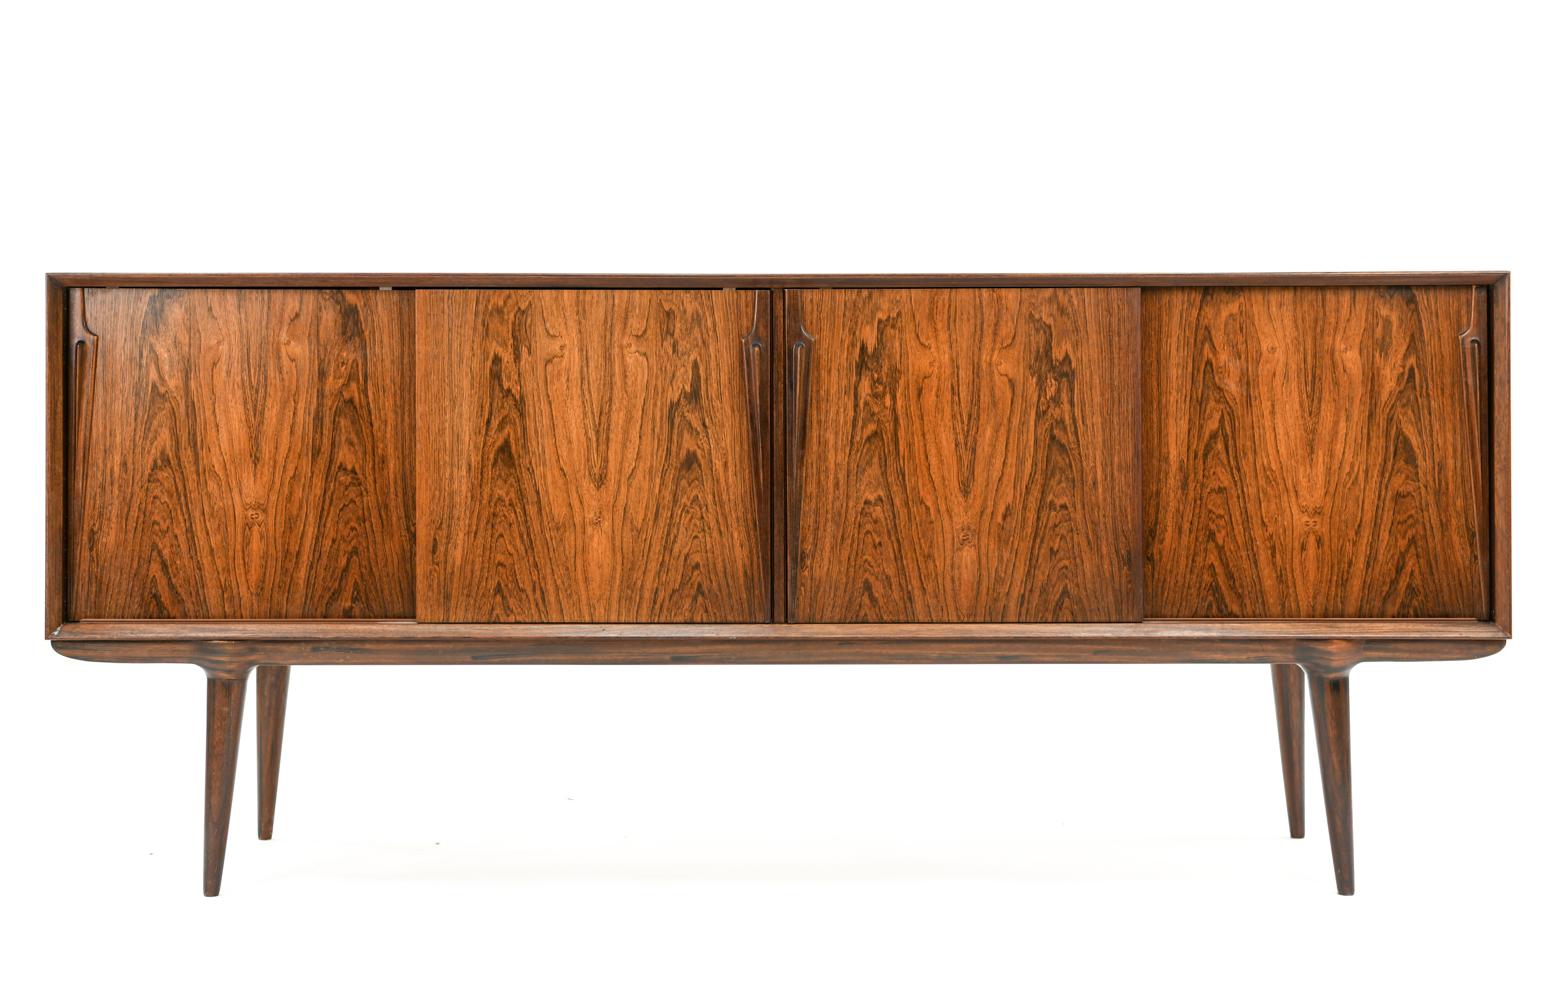 This Danish midcentury rosewood sideboard was produced by Oman Jr., possibly model 13. Featuring book-matched rosewood veneer, elongated cabinet door handles, and a refined base to add attractive elevation to the body of the cabinet. This sideboard